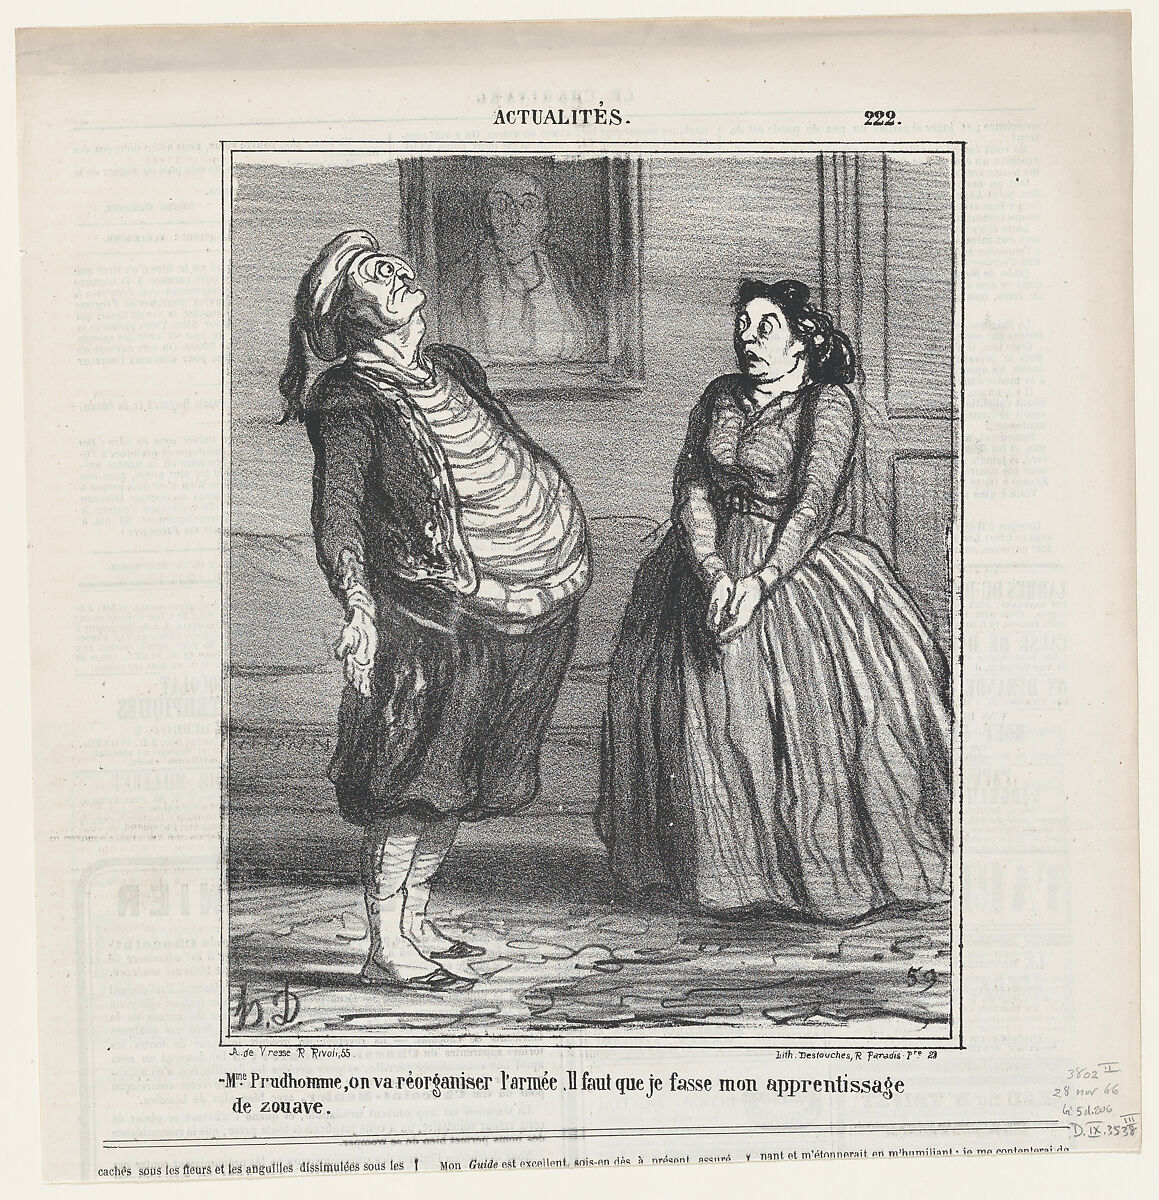 Madame Prudhomme, they are reorganizing the army. It is only right that I serve my duty as a Zouave, from 'News of the day,' published in Le Charivari, November 28, 1866, Honoré Daumier (French, Marseilles 1808–1879 Valmondois), Lithograph on newsprint; third state of three (Delteil) 